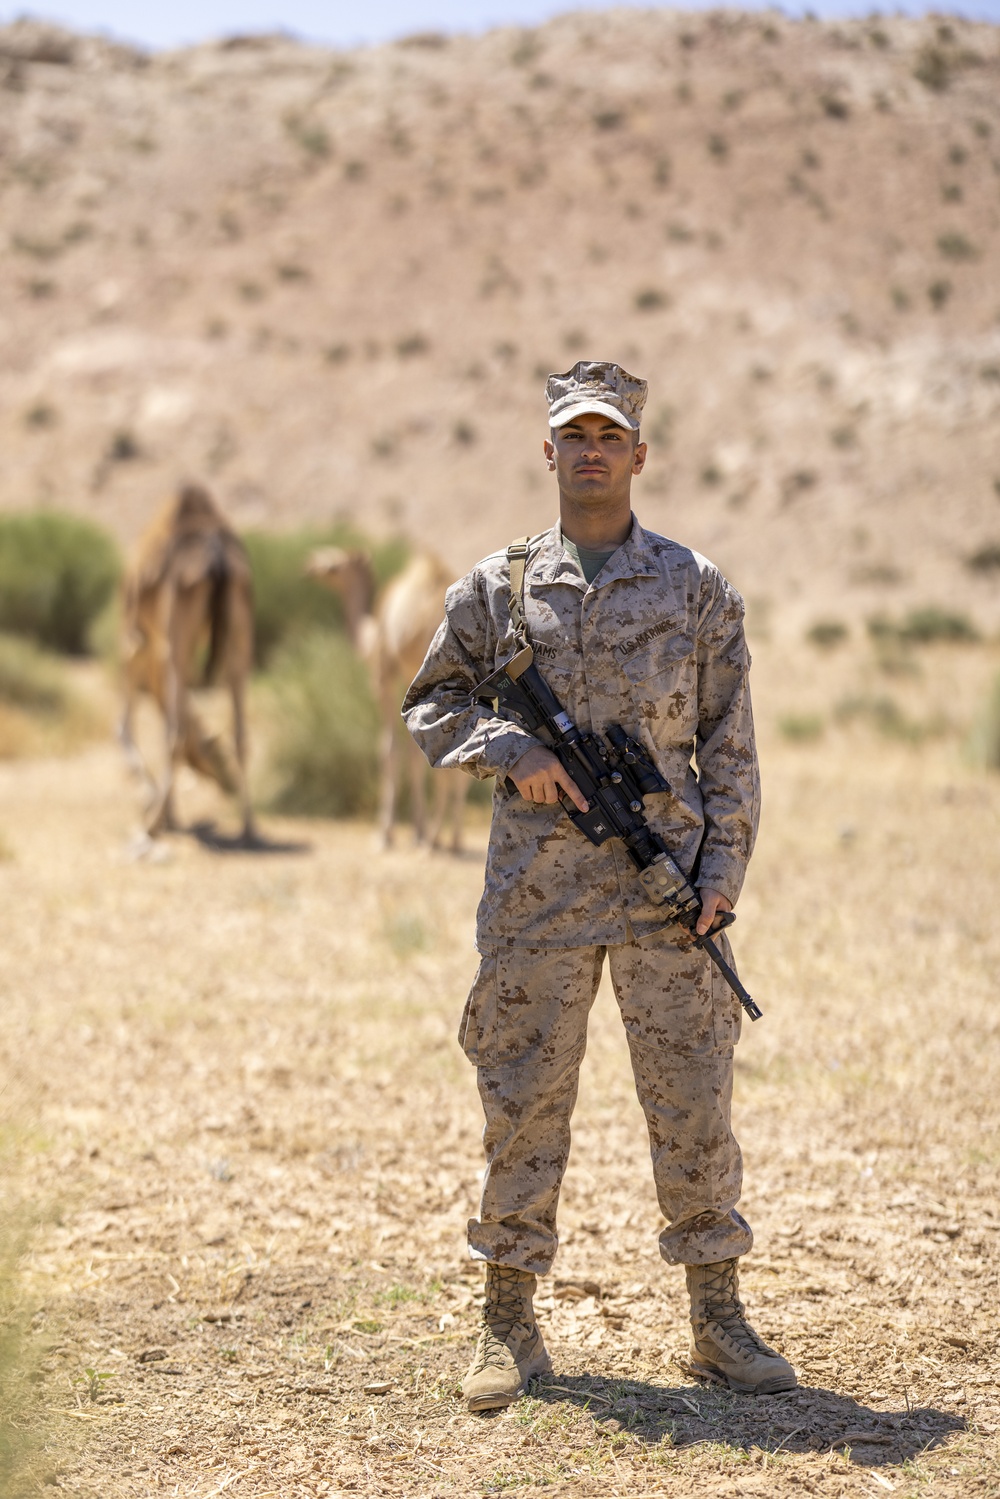 Beyond Borders: A Lebanese-American Marine's Training in the Levant